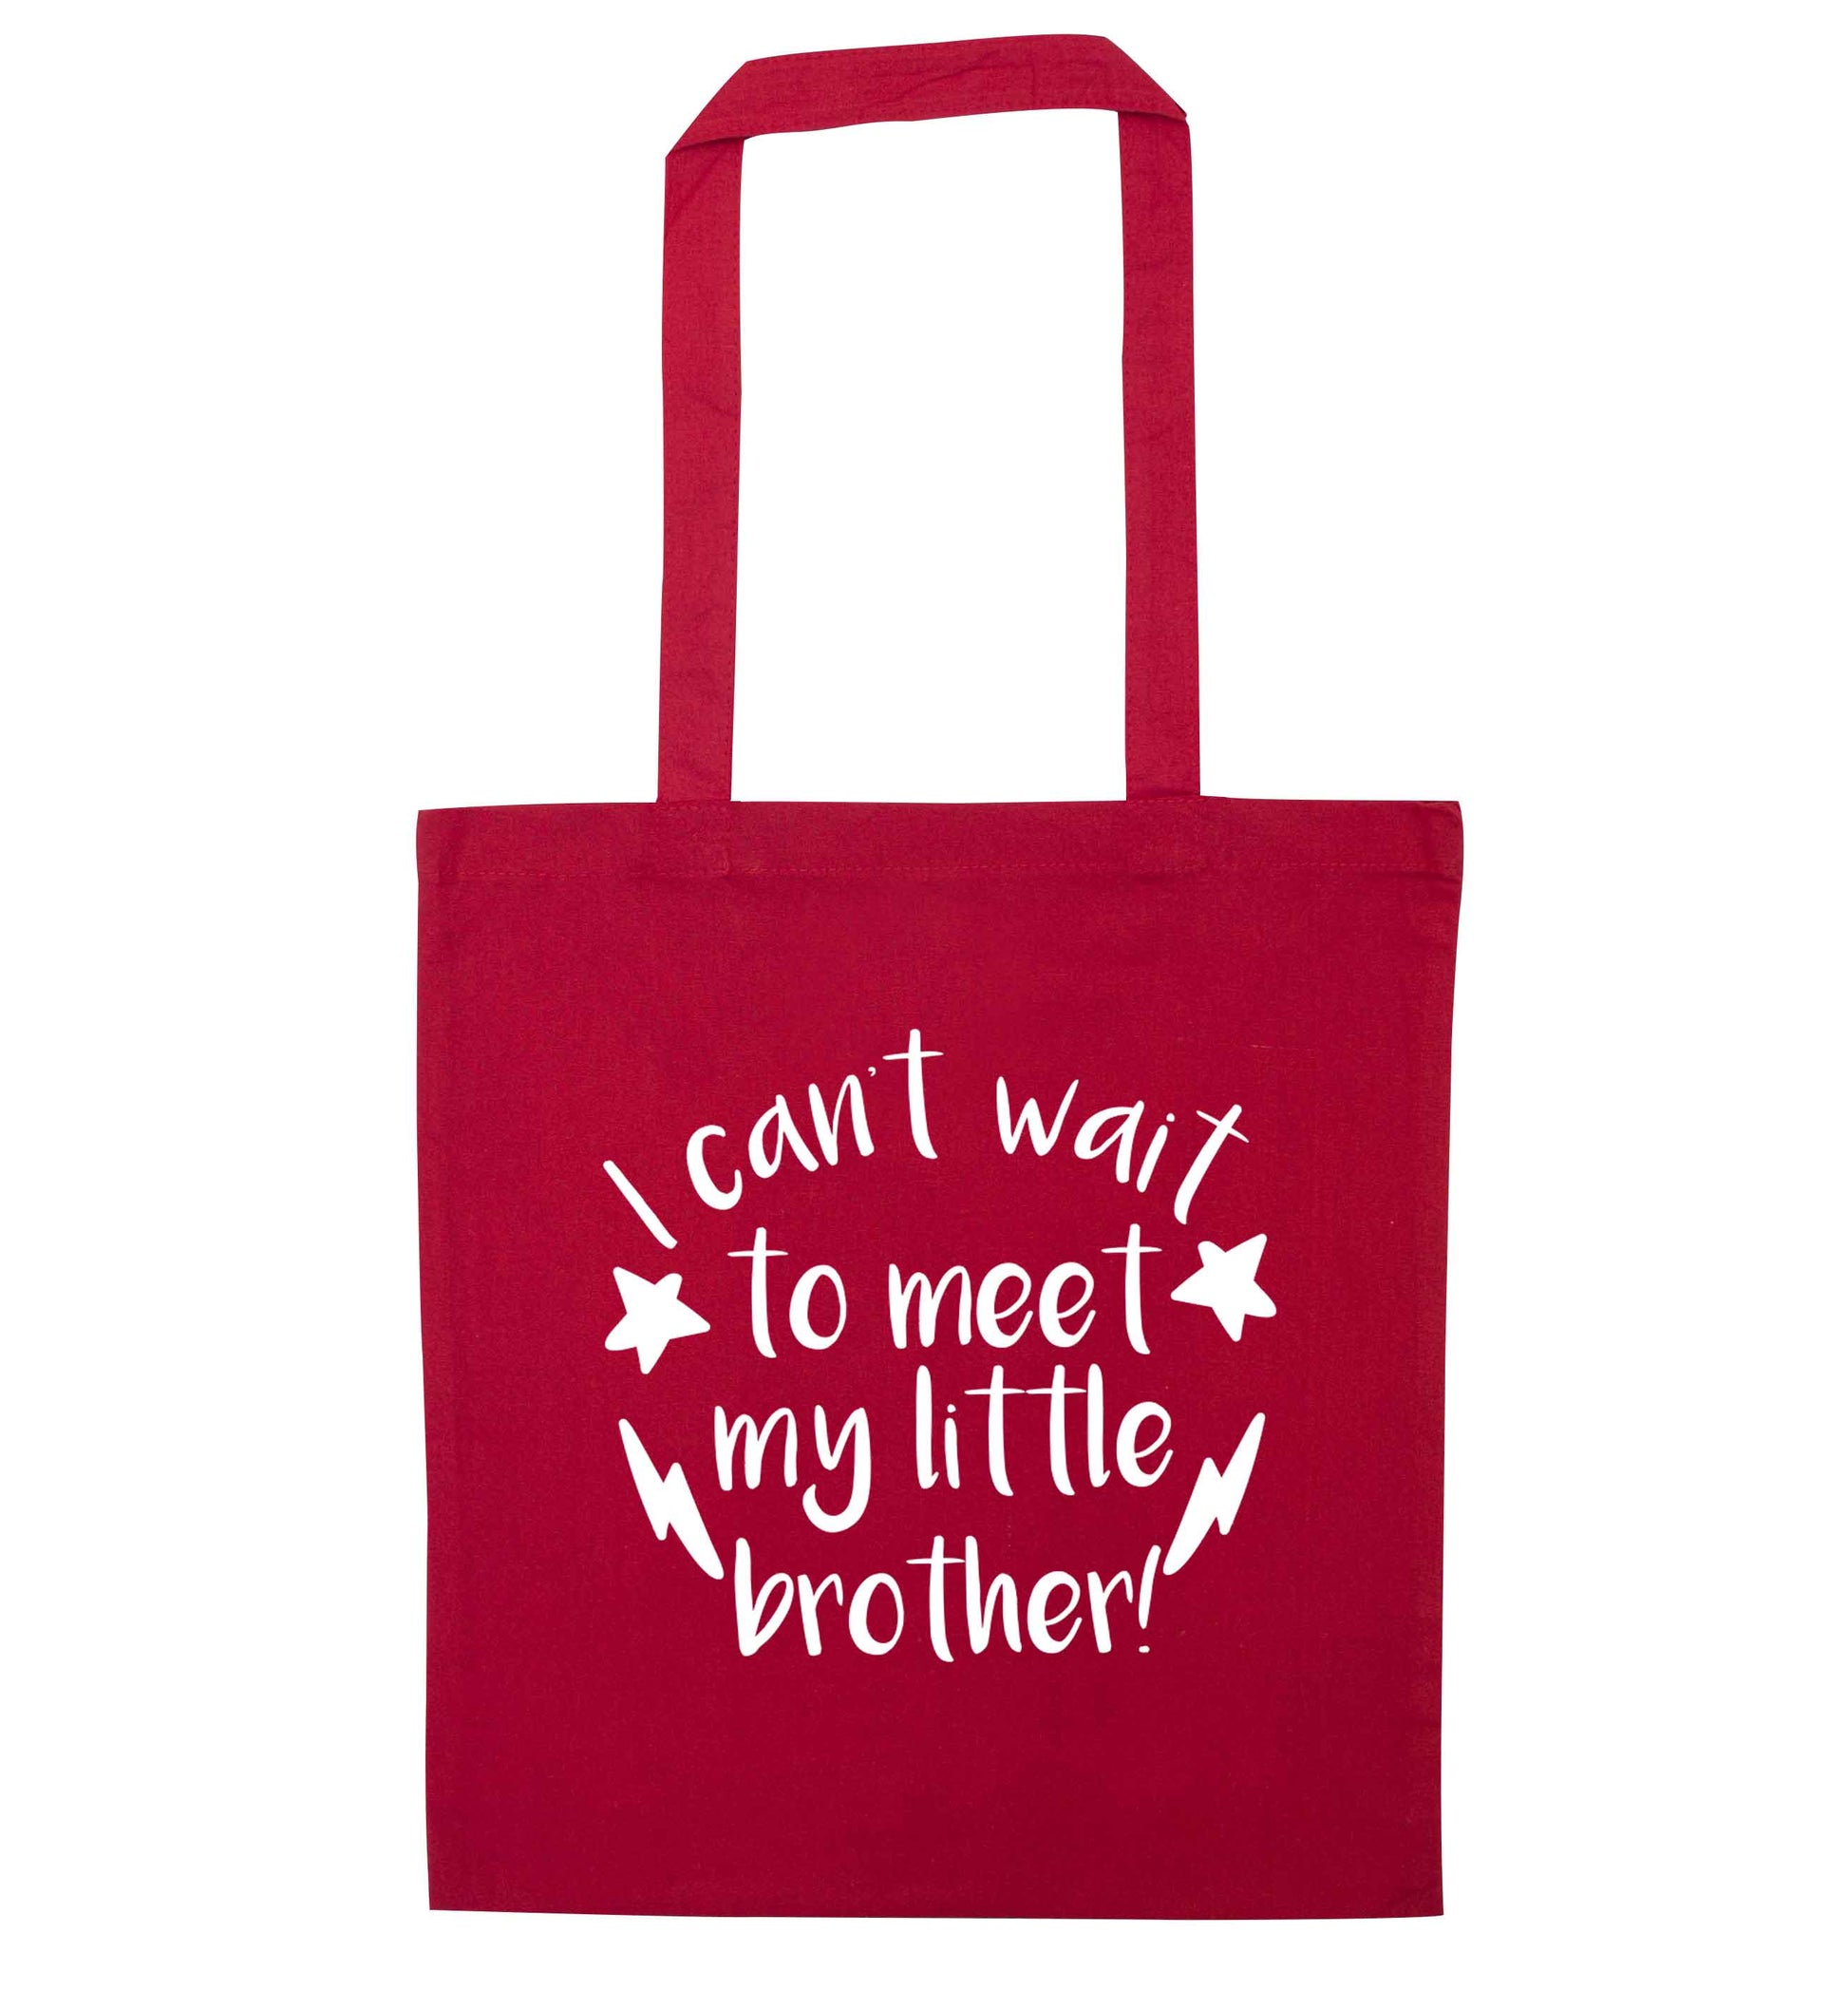 I can't wait to meet my sister! red tote bag